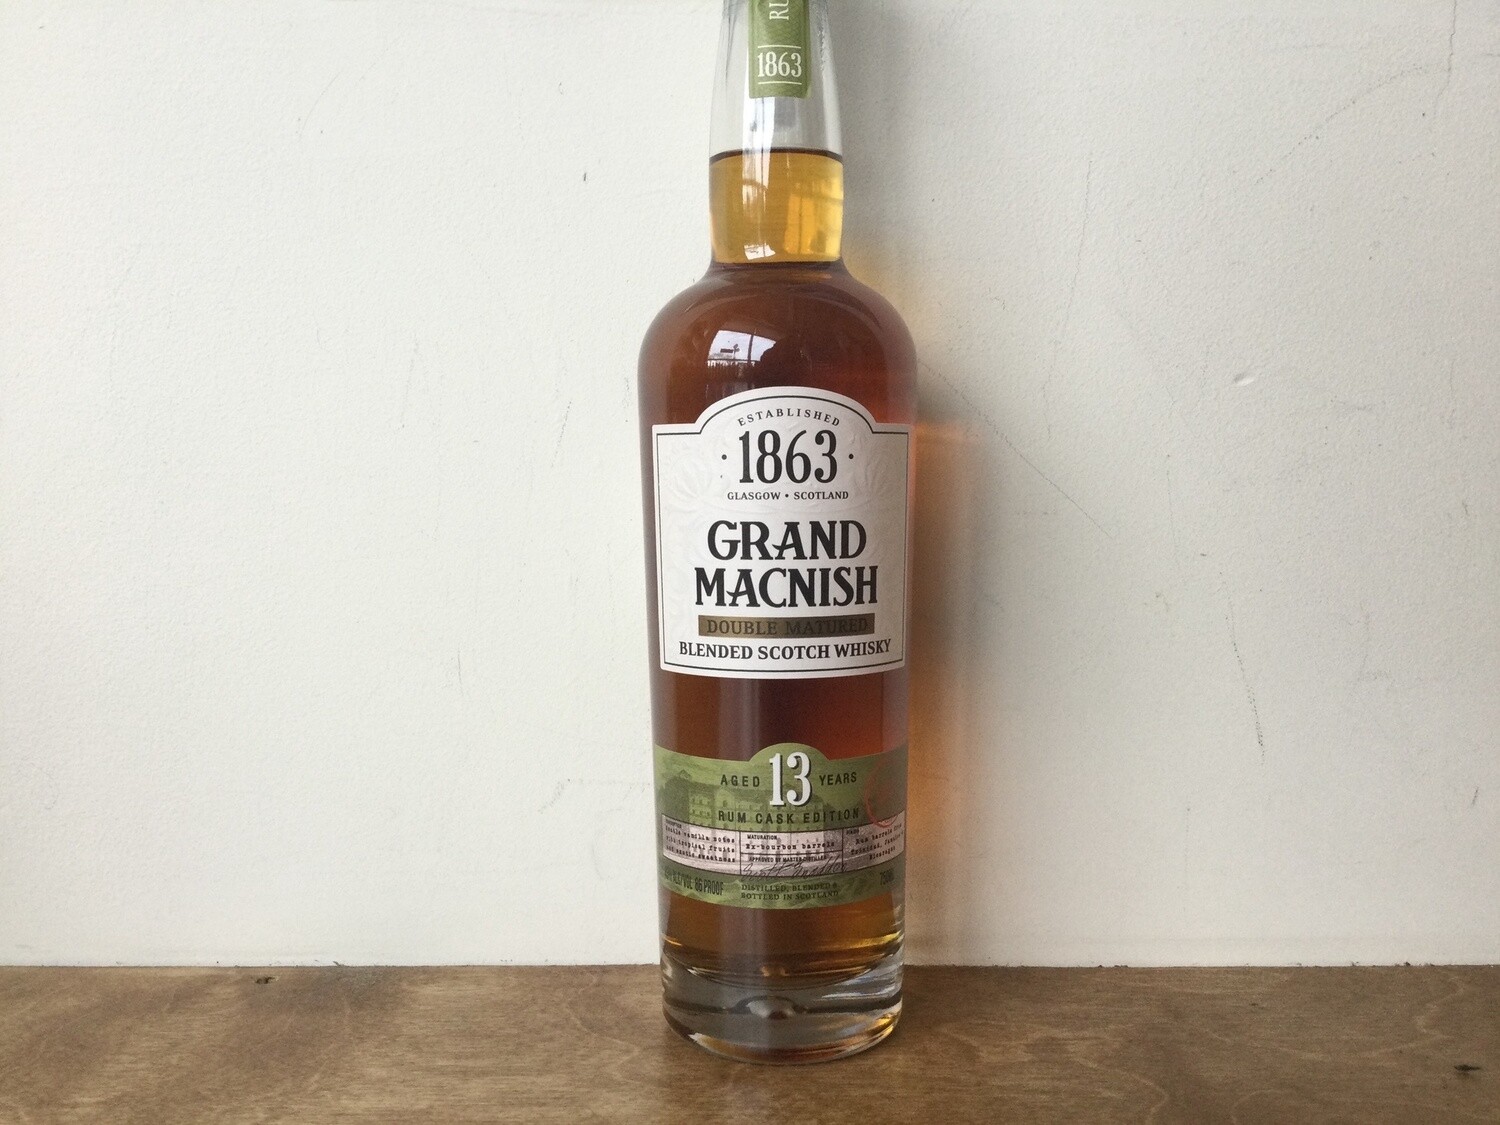 GrandMacNish, Double Matured Series 13 Years Old Blended Scotch Whisky Rum Cask Edition Batch No. 001